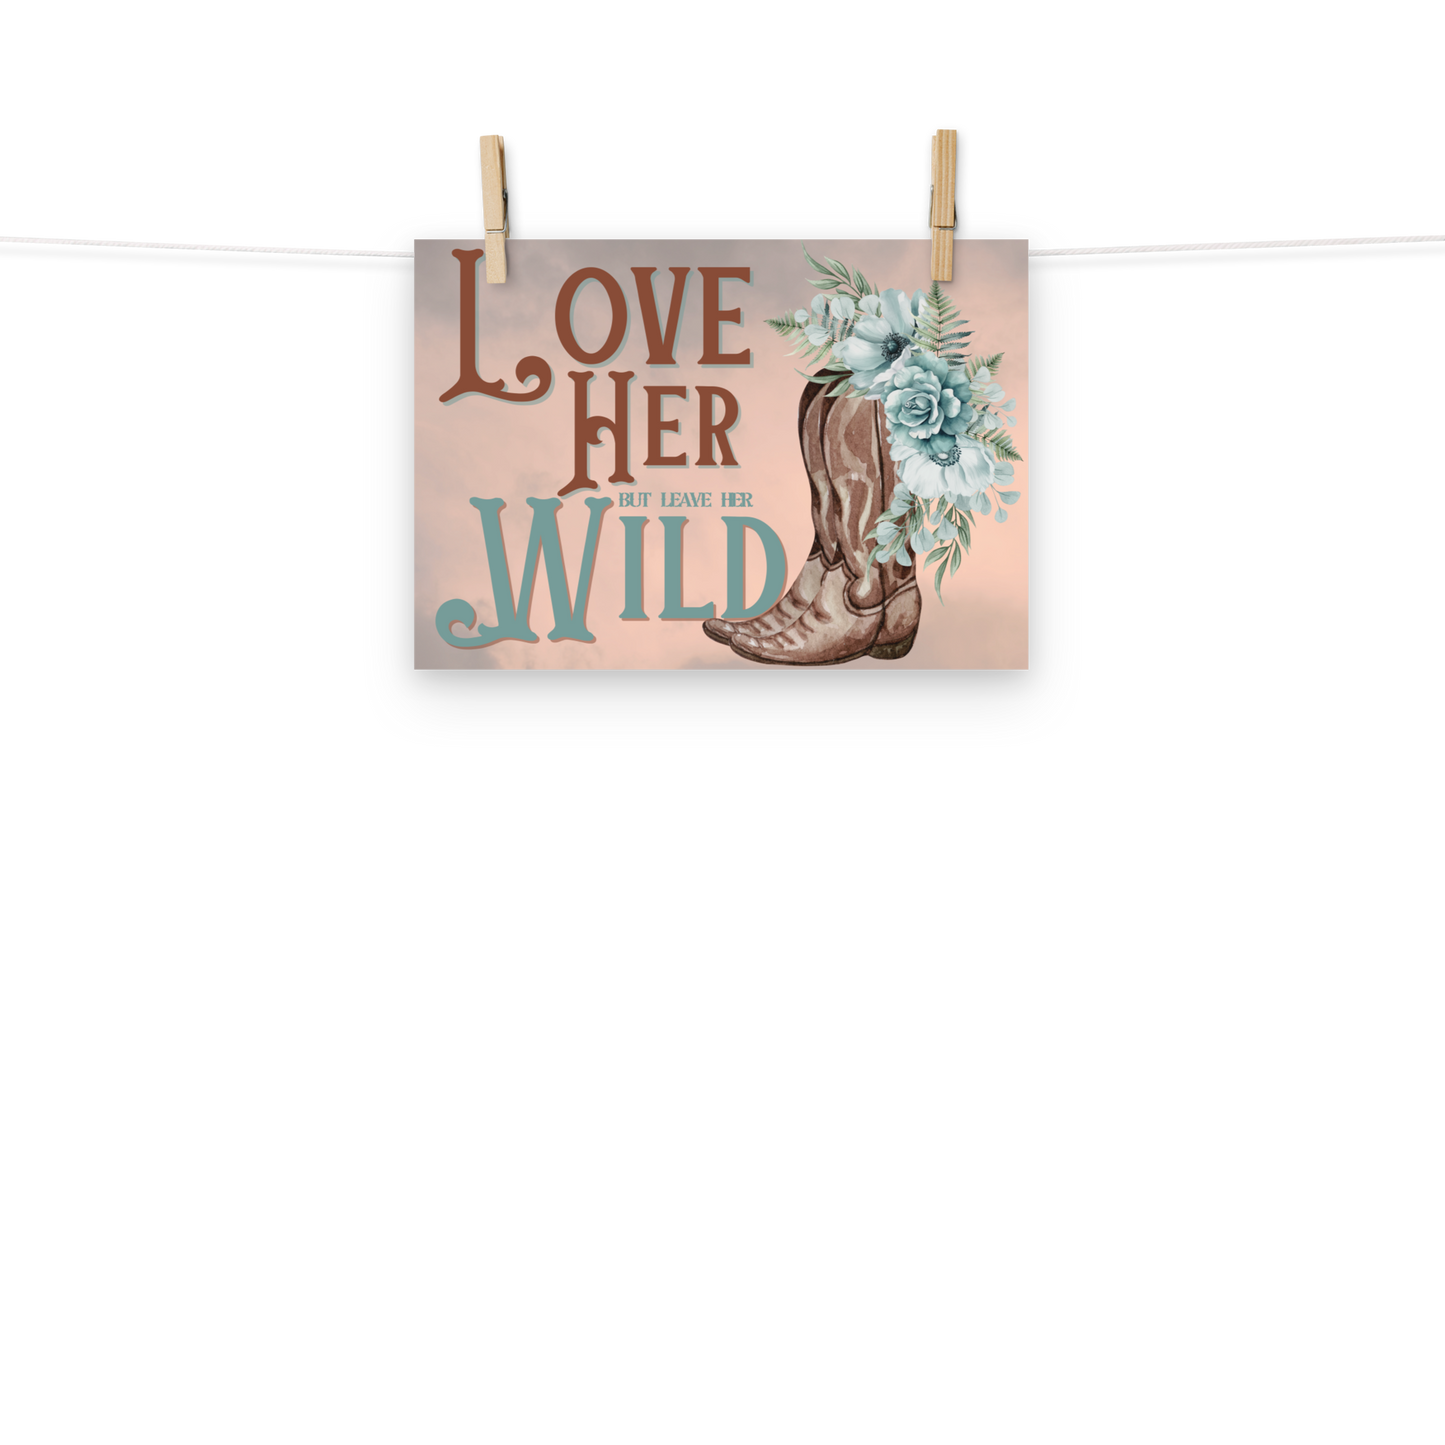 Love Her but leave her Wild Art Cowgirl Cowboy Boots Western Country Free Spirit A4 Poster Wall Art Print